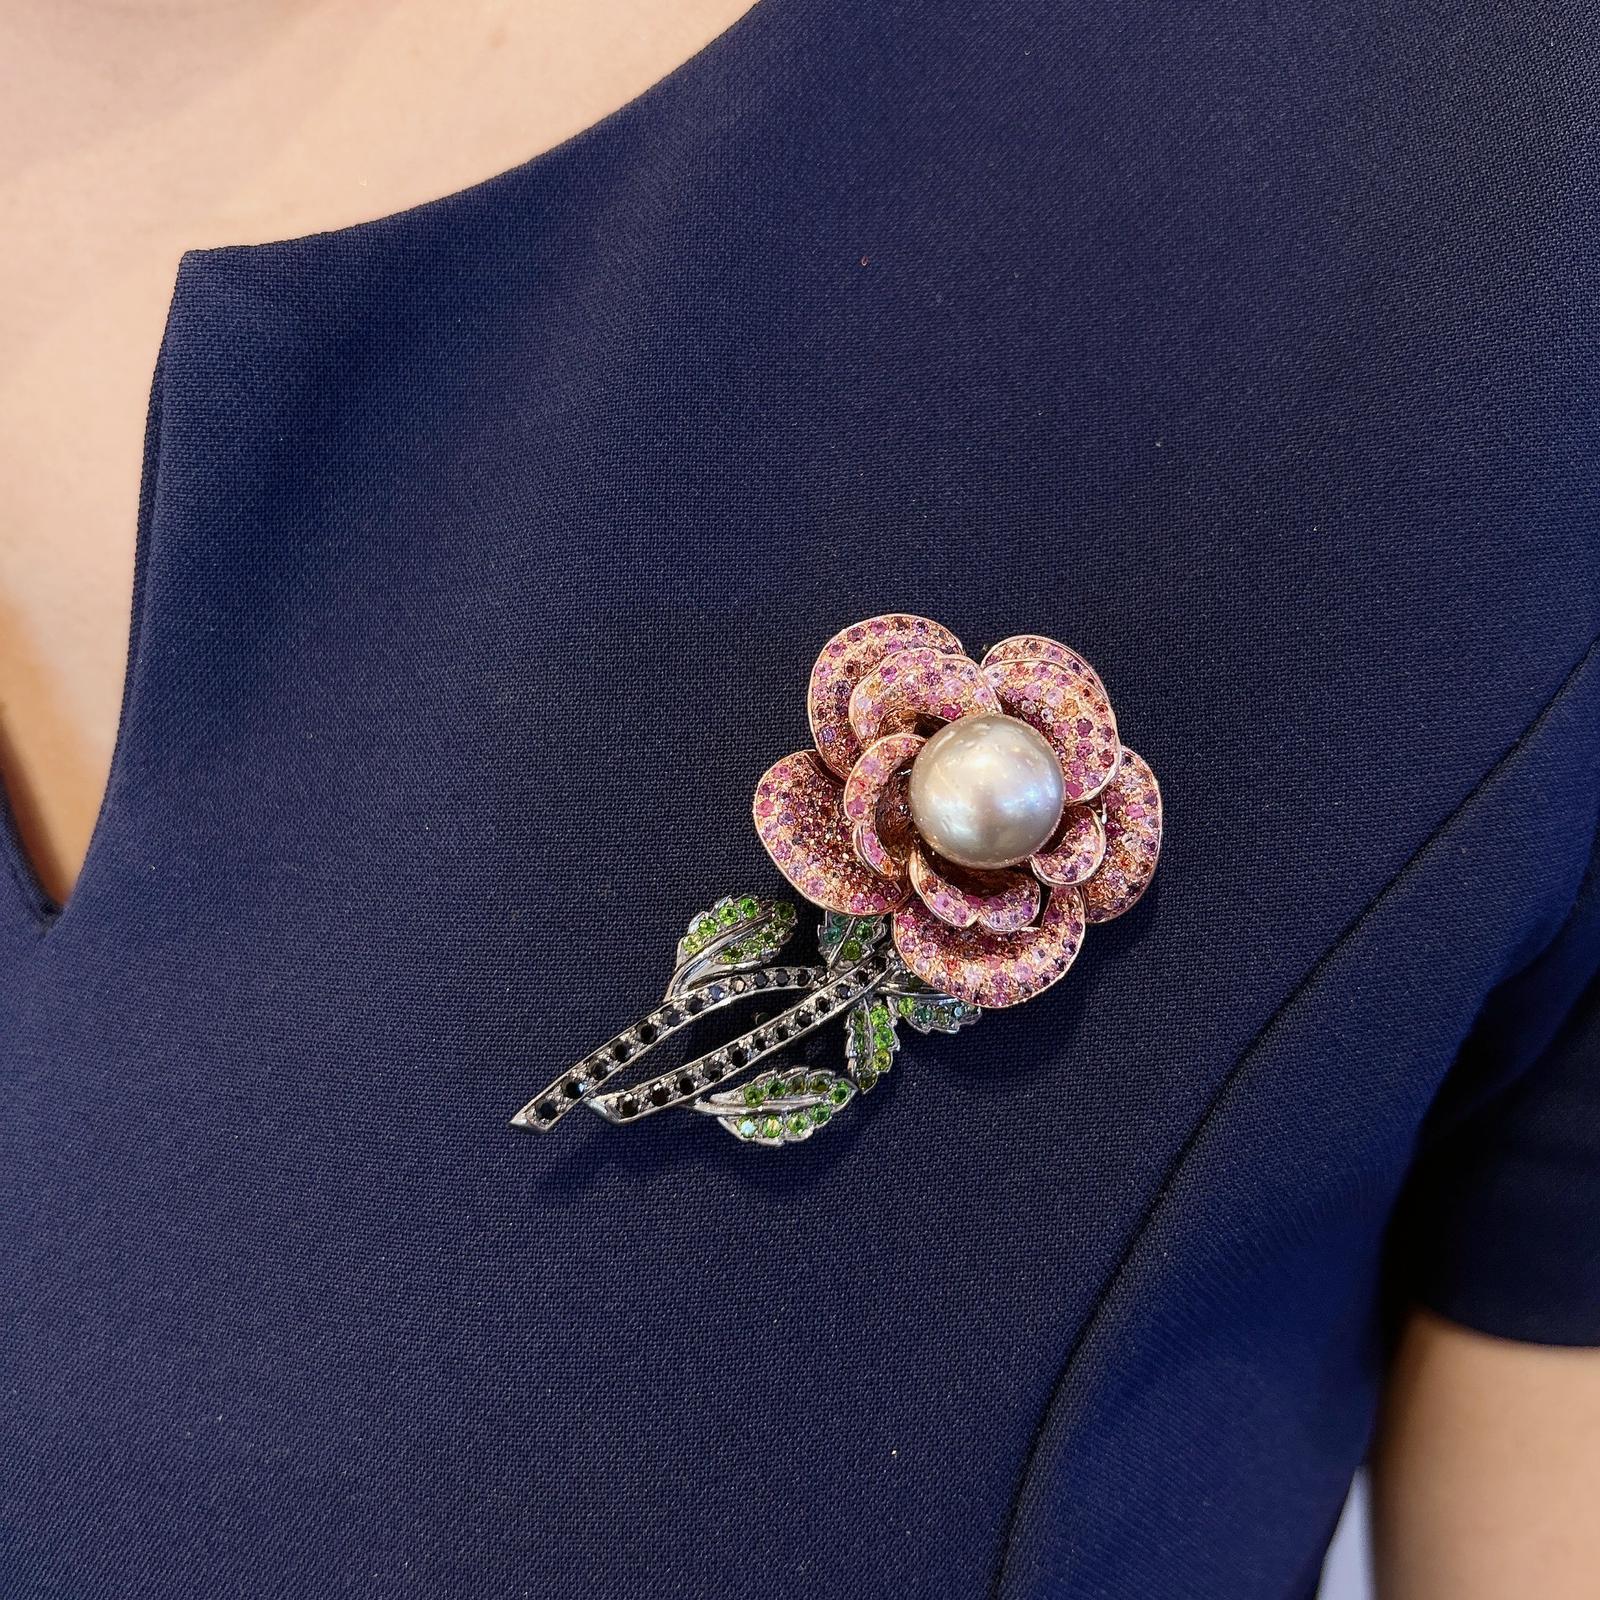 “Orient” Pink Sapphire & Pearl Brooch Set in 22k Gold & Silver For Sale 7